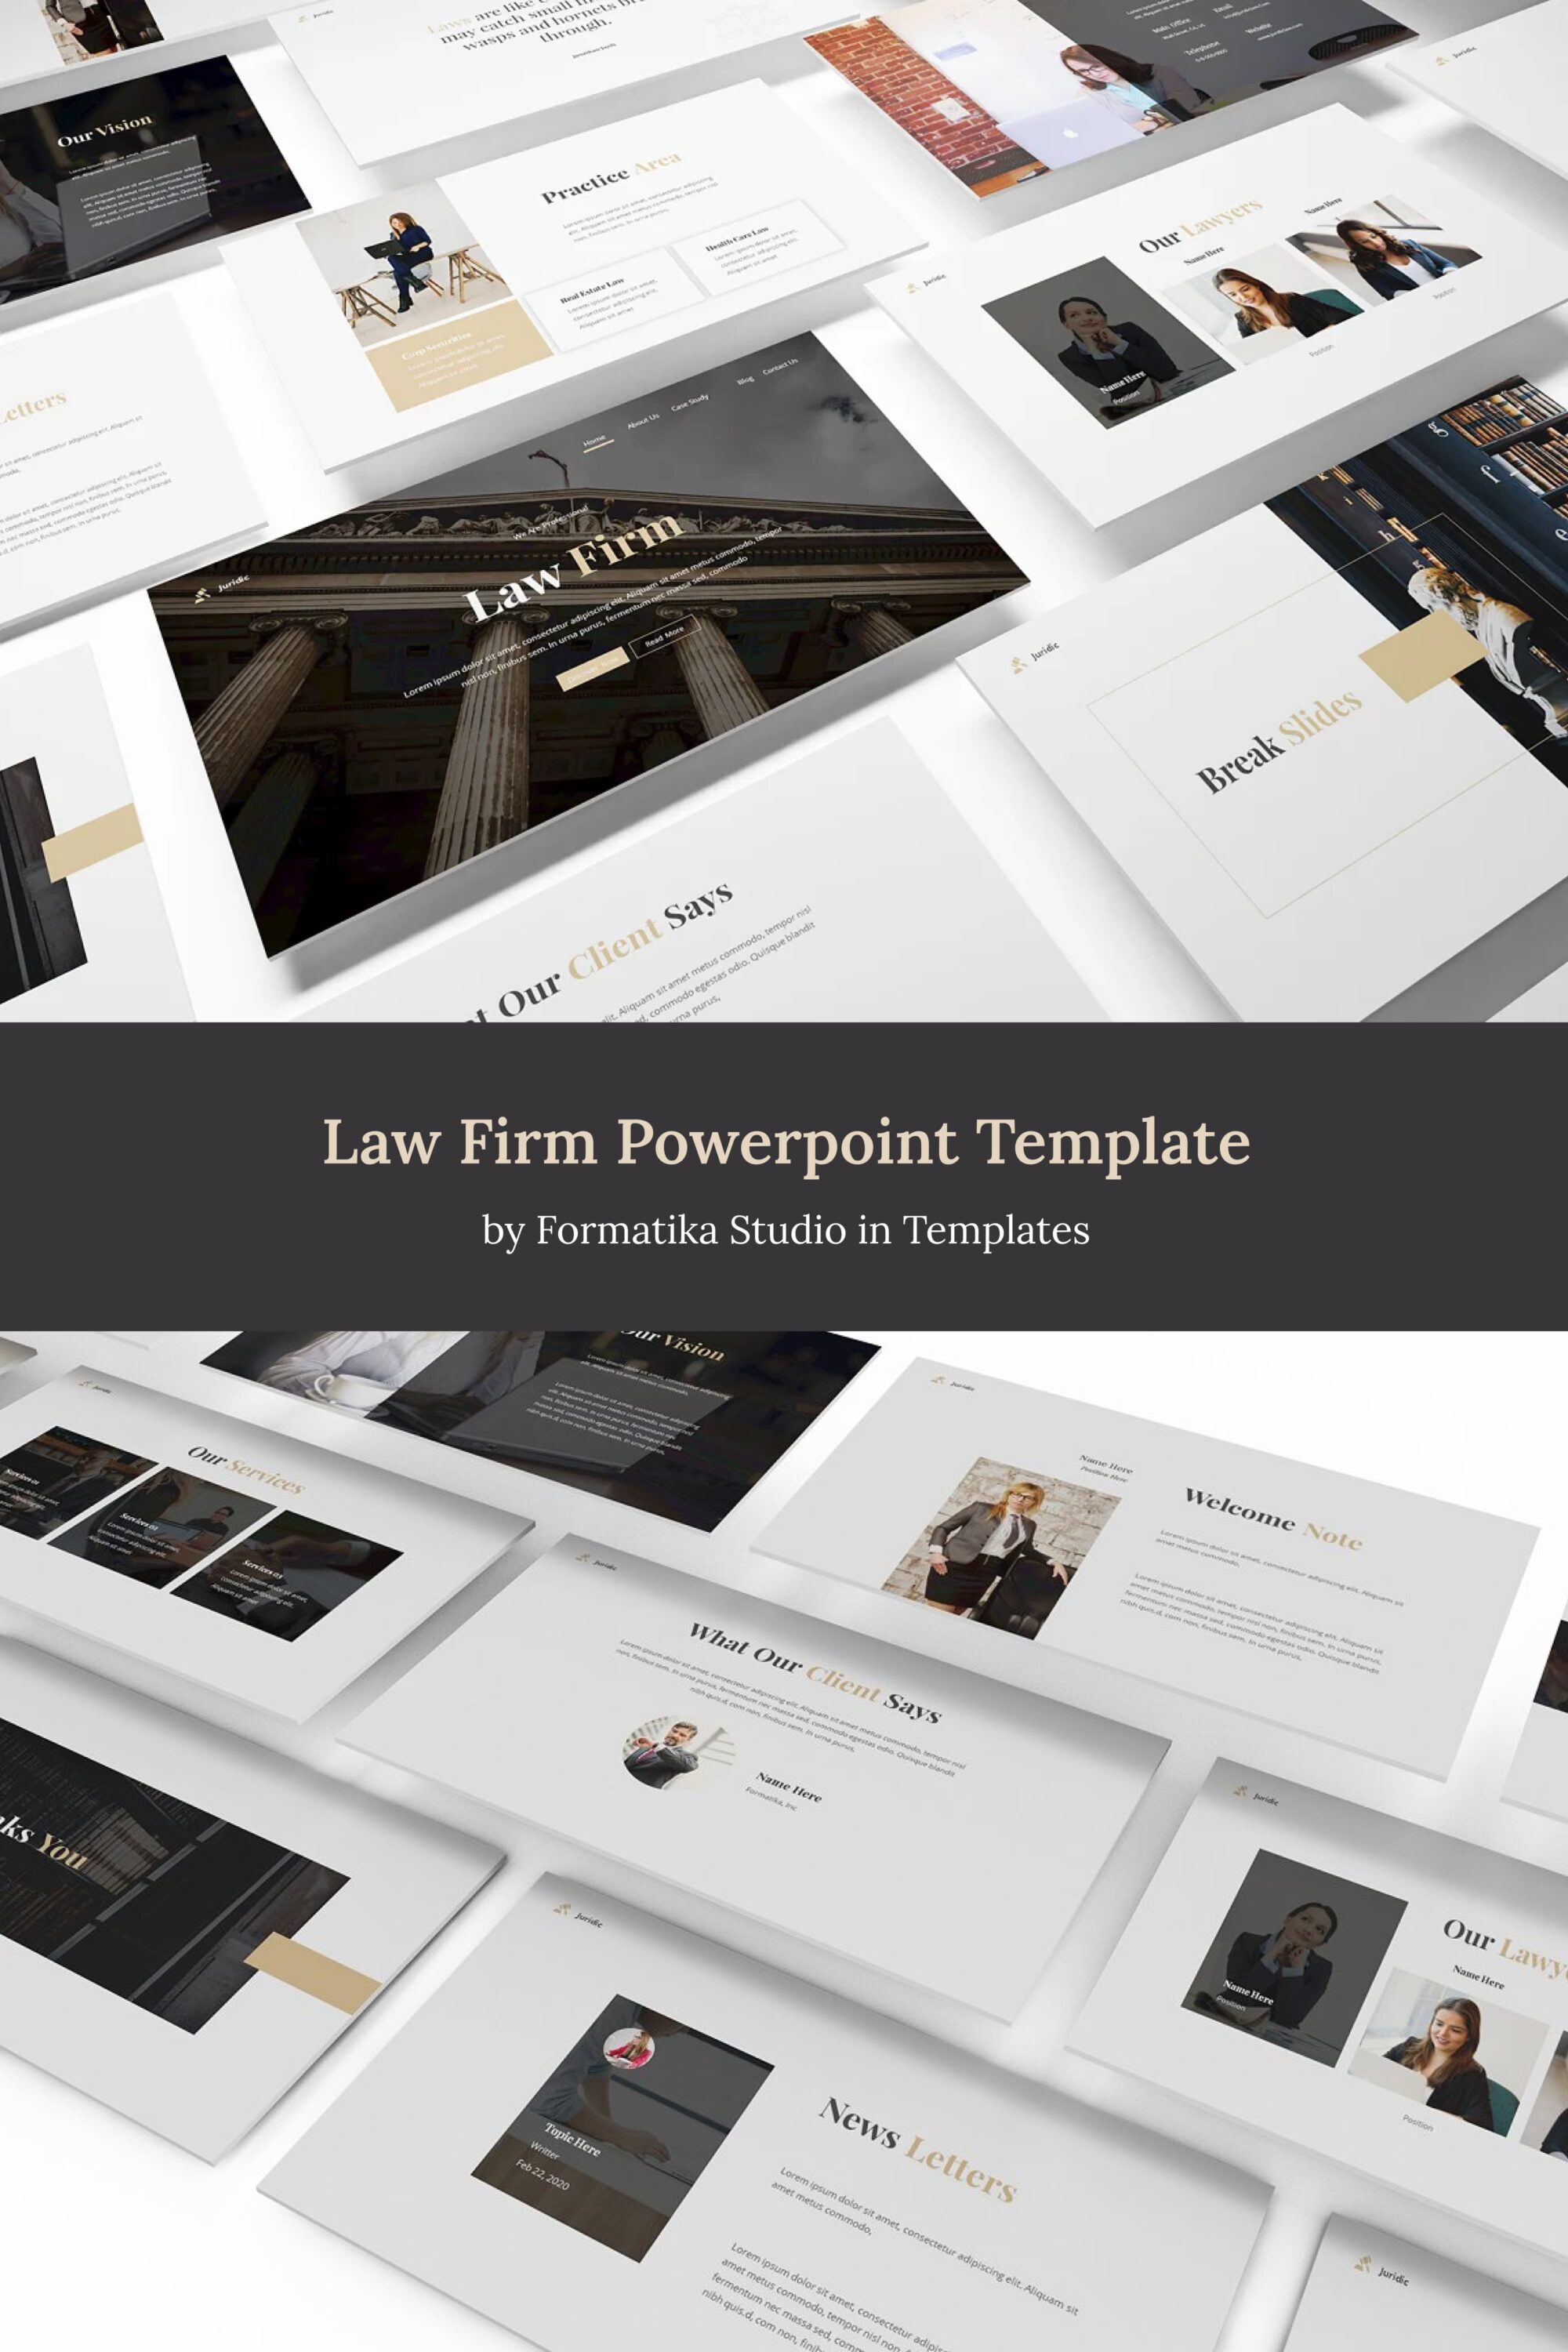 law firm powerpoint template 06.